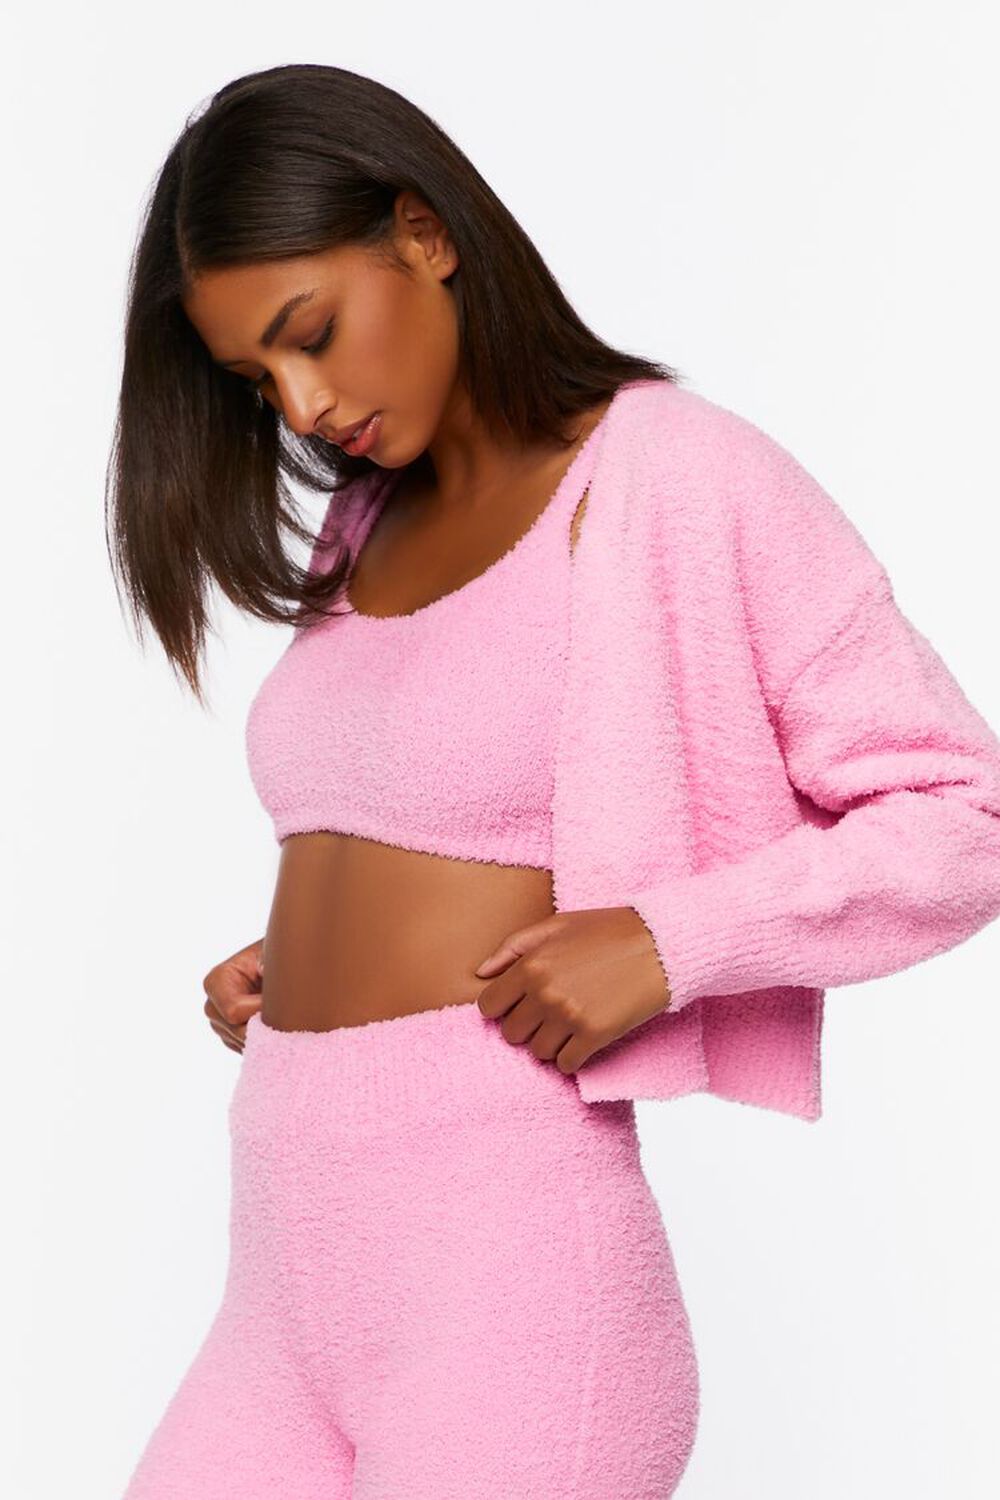 PINK ICING Fuzzy Knit Cardigan Sweater, image 2